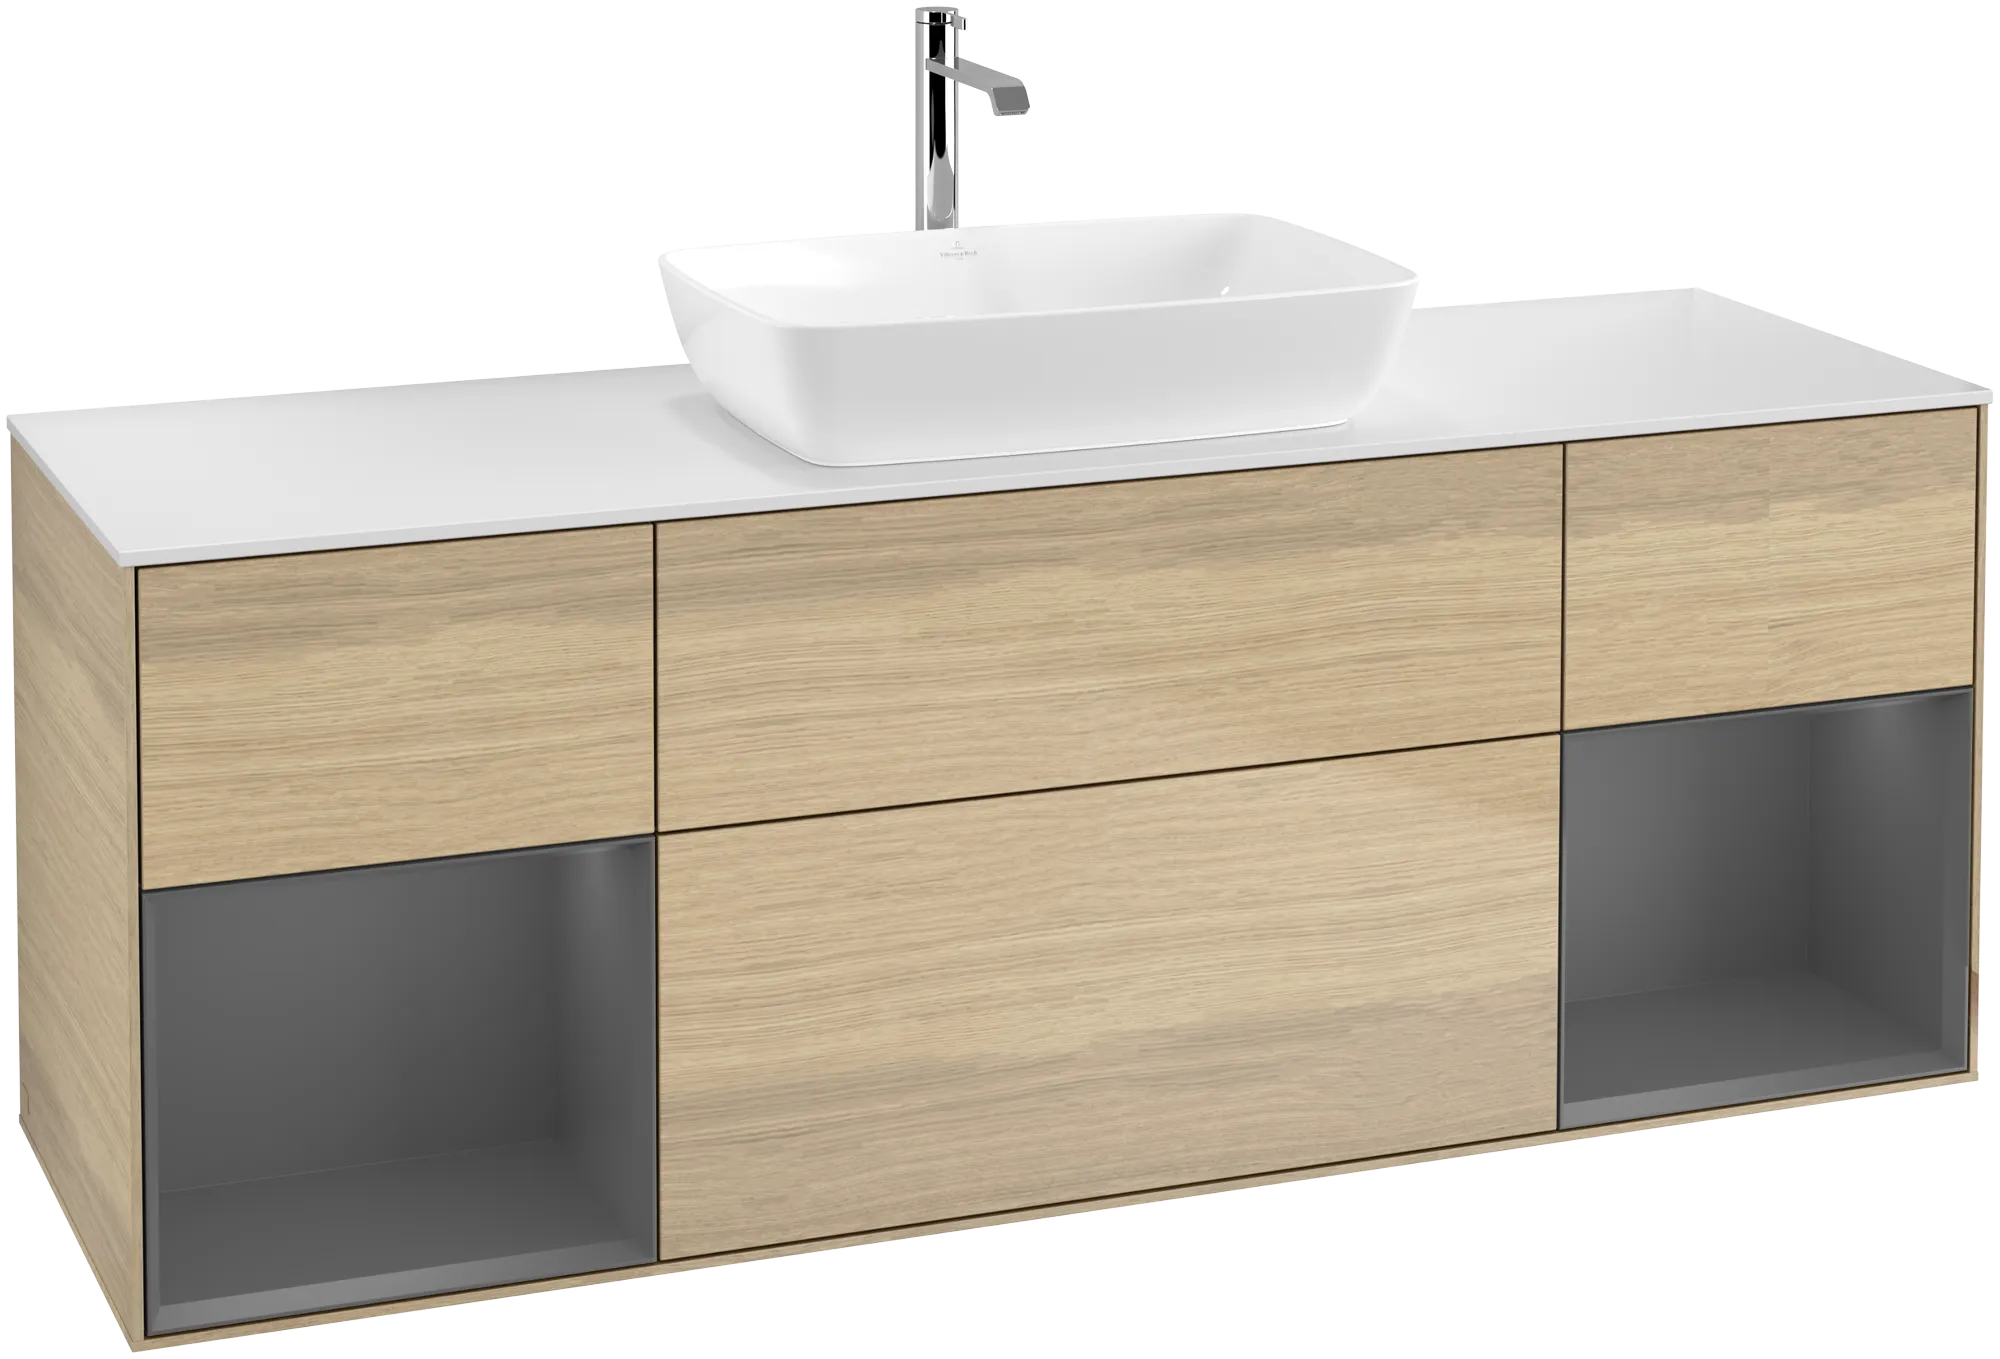 VILLEROY BOCH Finion Vanity unit, with lighting, 4 pull-out compartments, 1600 x 603 x 501 mm, Oak Veneer / Anthracite Matt Lacquer / Glass White Matt #G861GKPC resmi